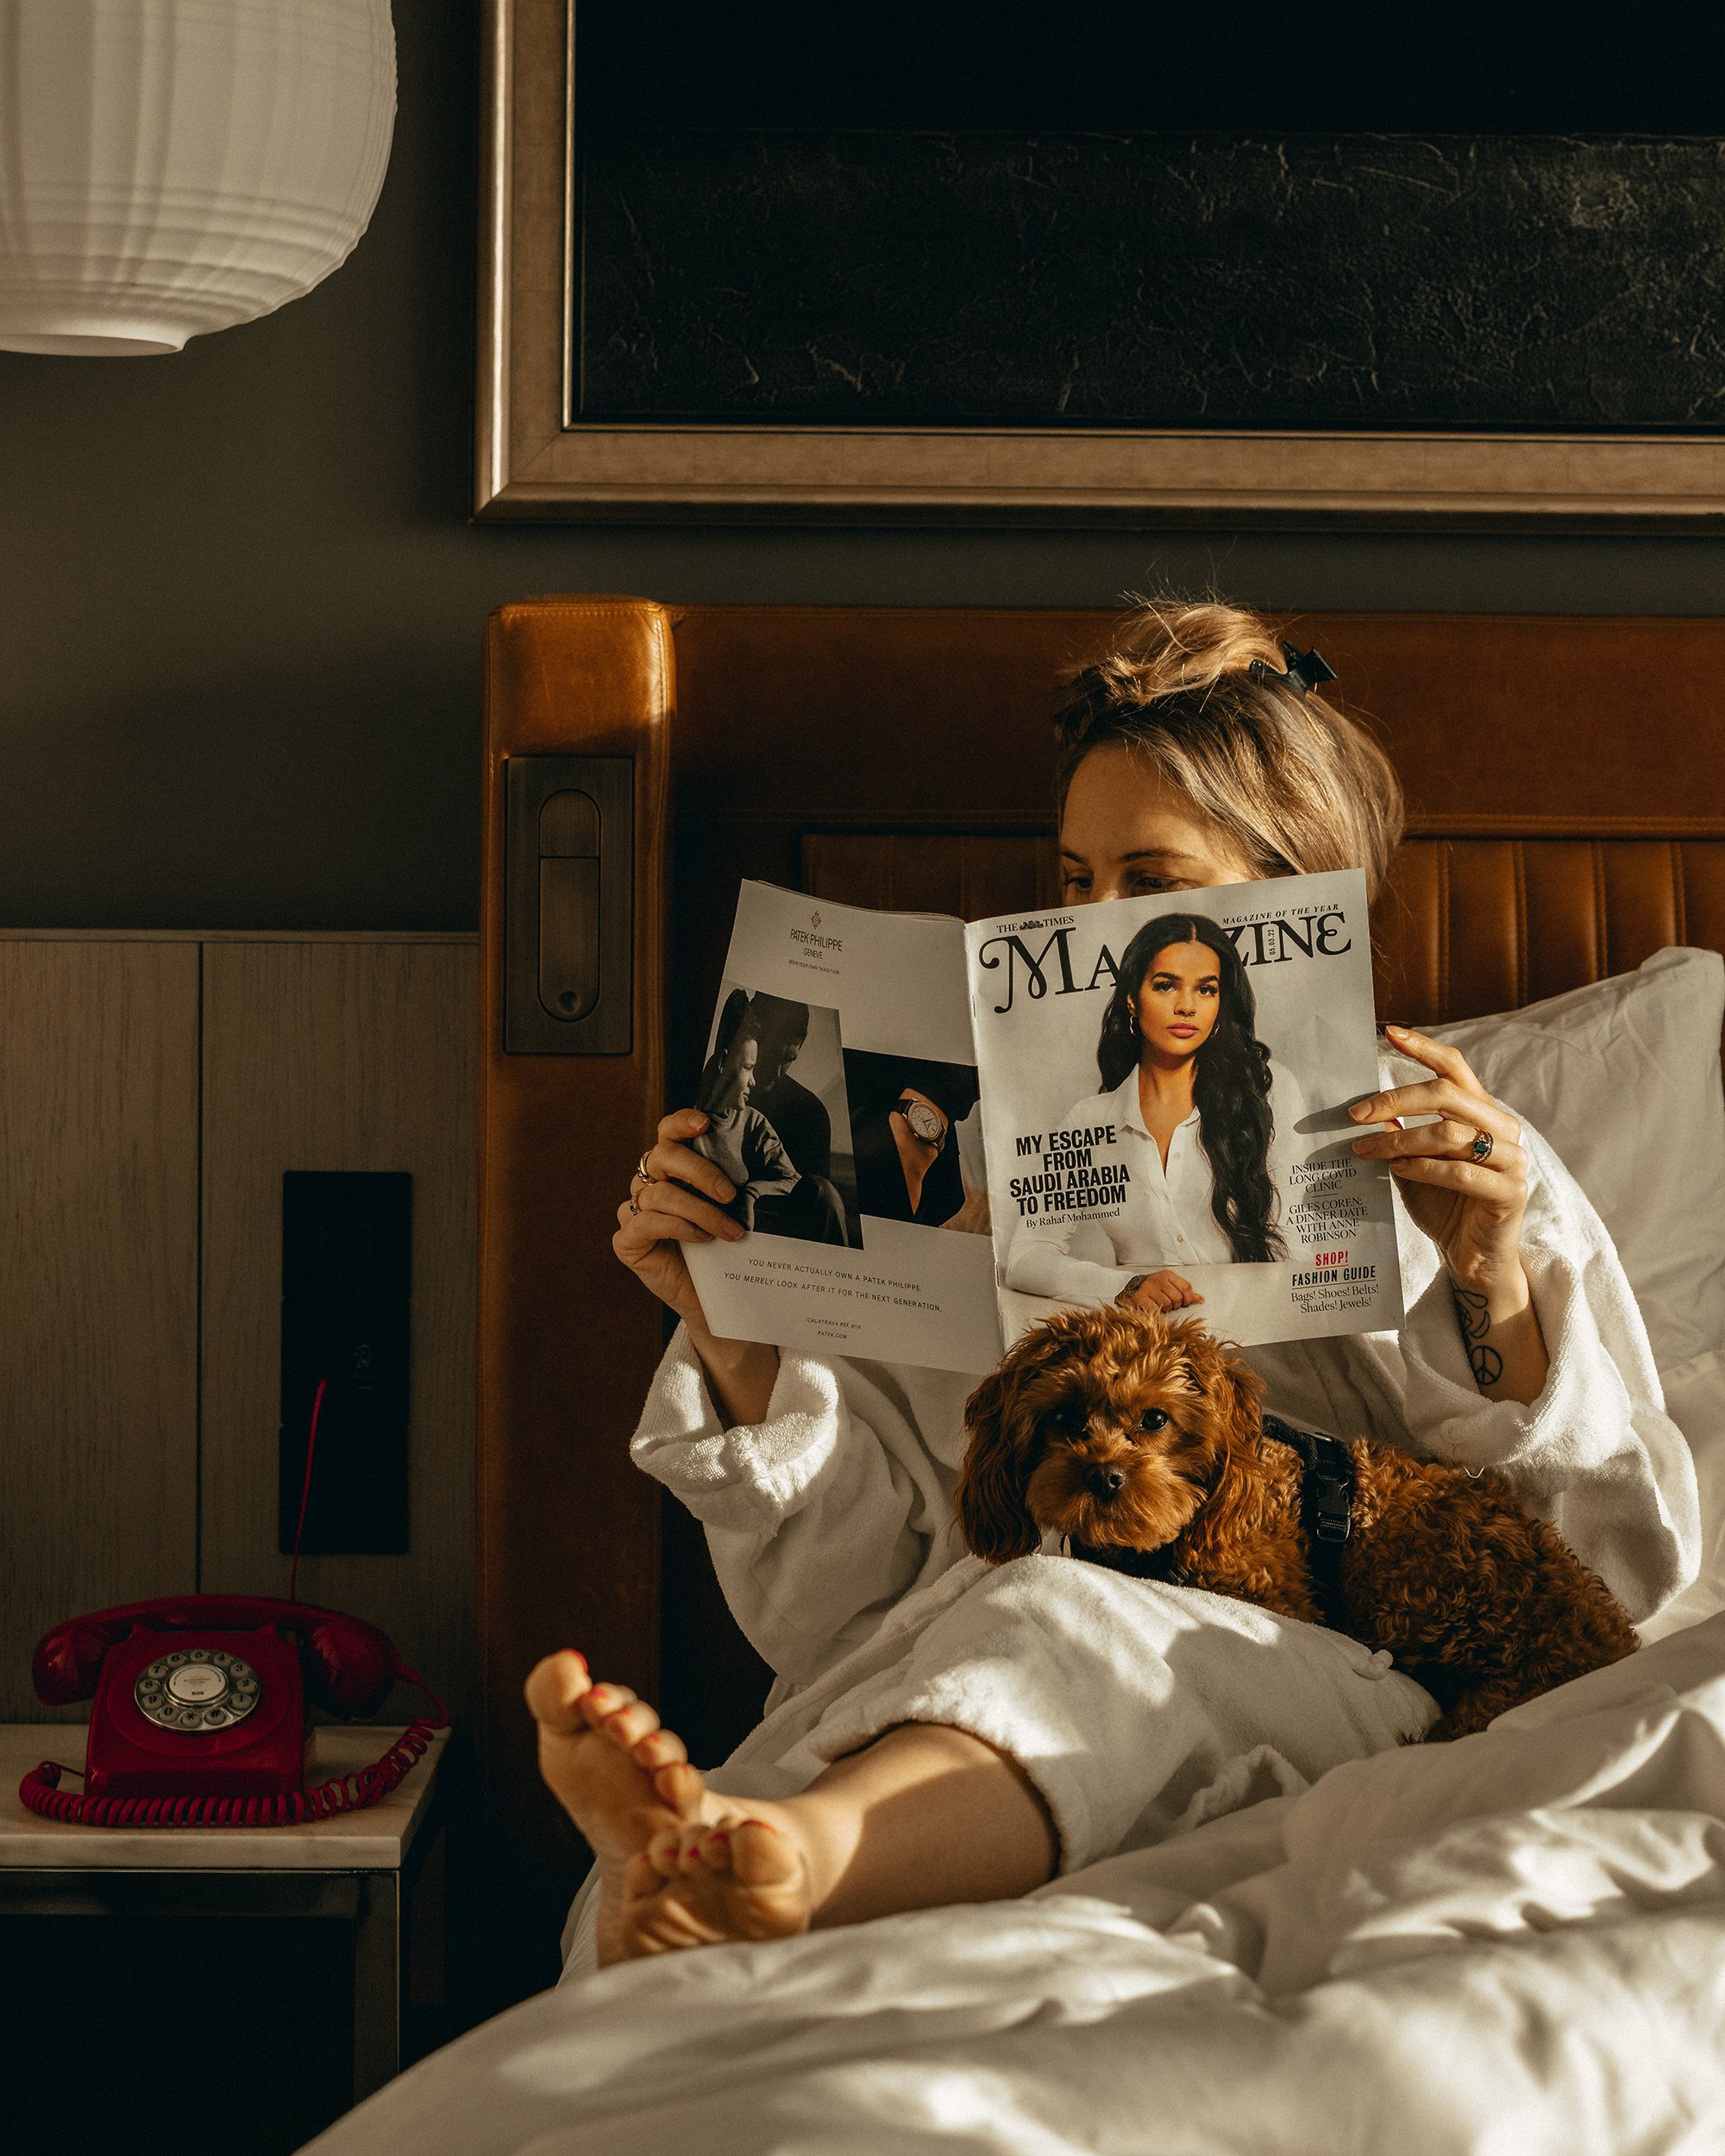 Girl in bed reading the paper with her dog on her lap